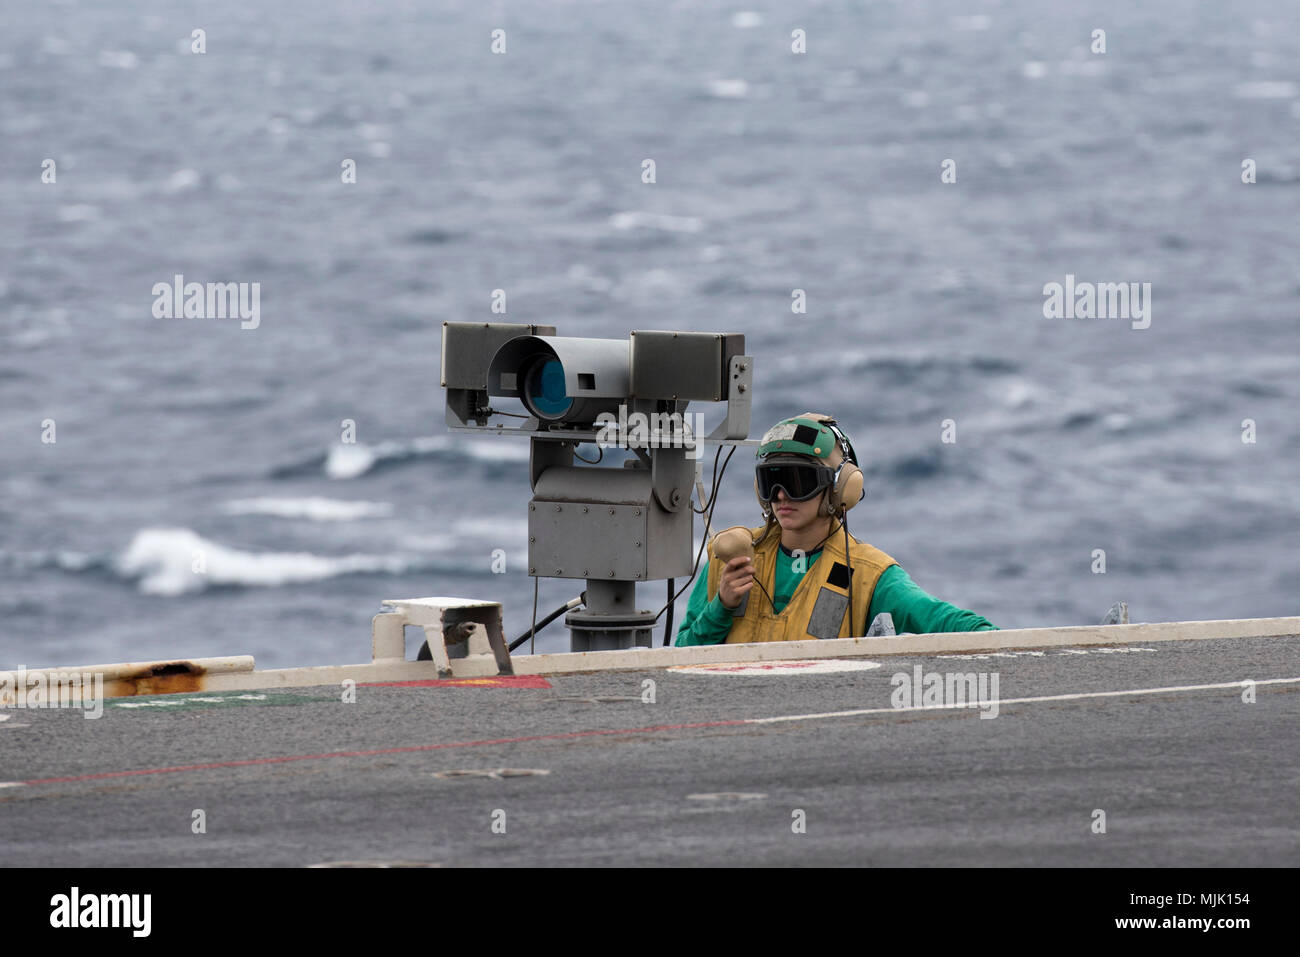 171205-N-EA818-257 ATLANTIC OCEAN (Dec. 5, 2017)  Aviation Boatswain's Mate (Equipment) 3rd Class Nickolas Lim operates a sound-powered telephone on a catwalk off the bow of the flight deck aboard USS Harry S. Truman (CVN 75). Truman is currently underway conducting carrier qualifications in preparation for future operations. (U.S. Navy photo by Mass Communication Specialist 2nd Class Tommy Gooley/Released) Stock Photo